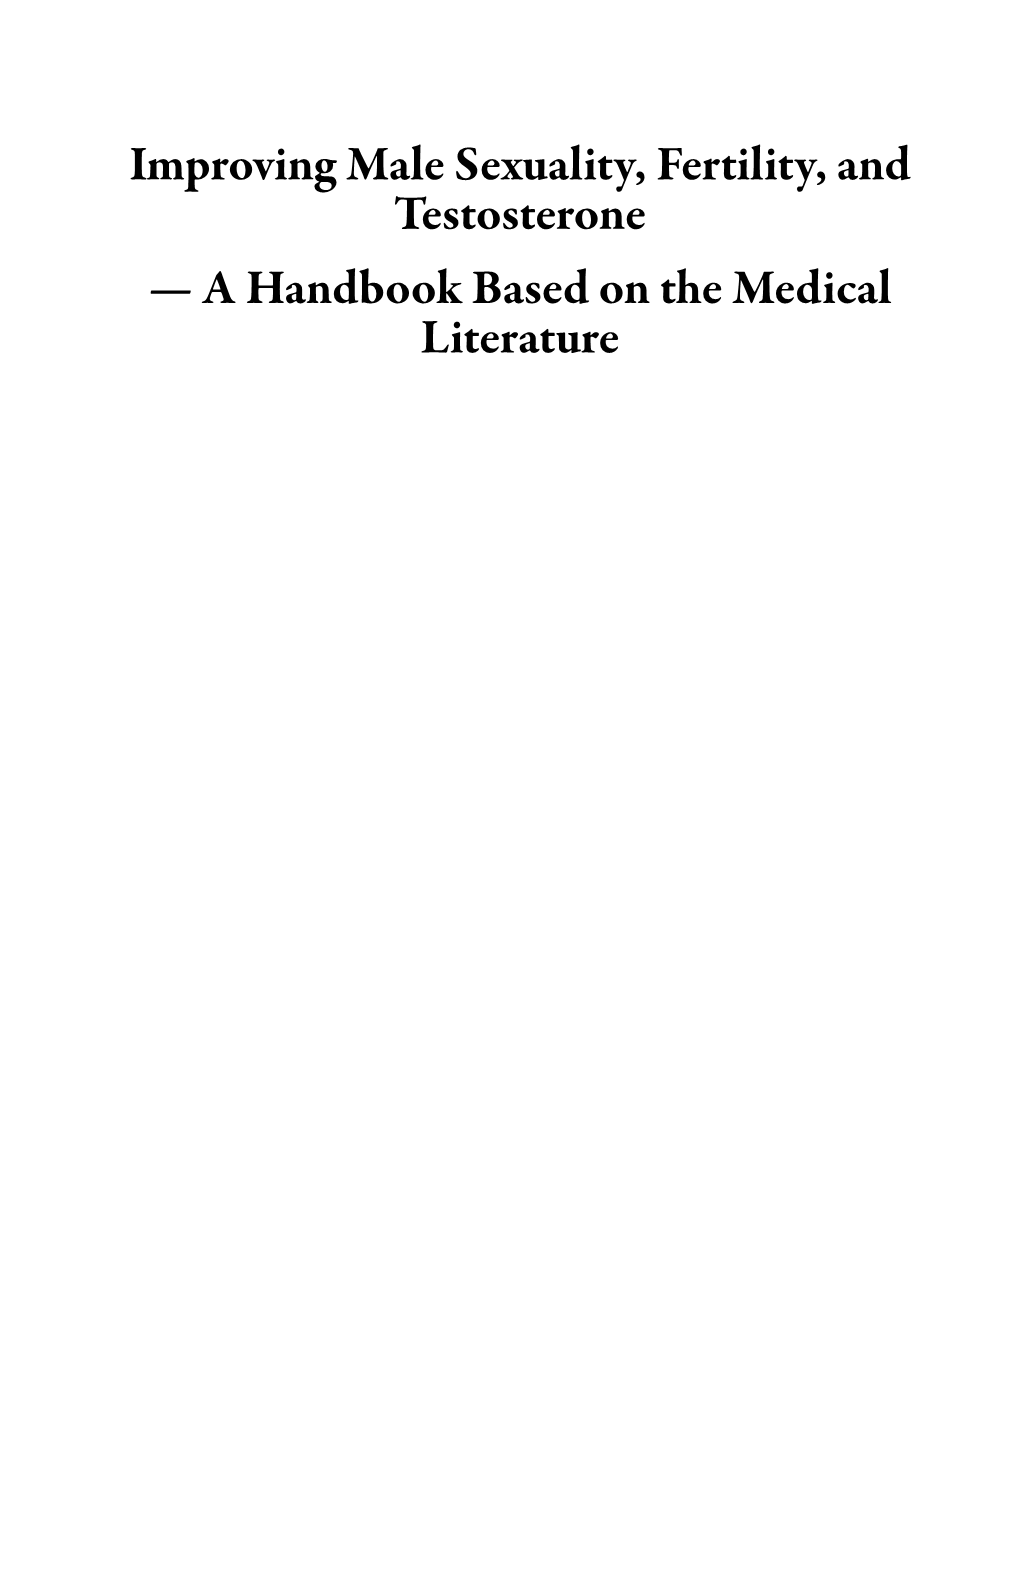 Improving Male Sexuality, Fertility, and Testosterone — a Handbook Based on the Medical Literature Also by Dan Purser MD